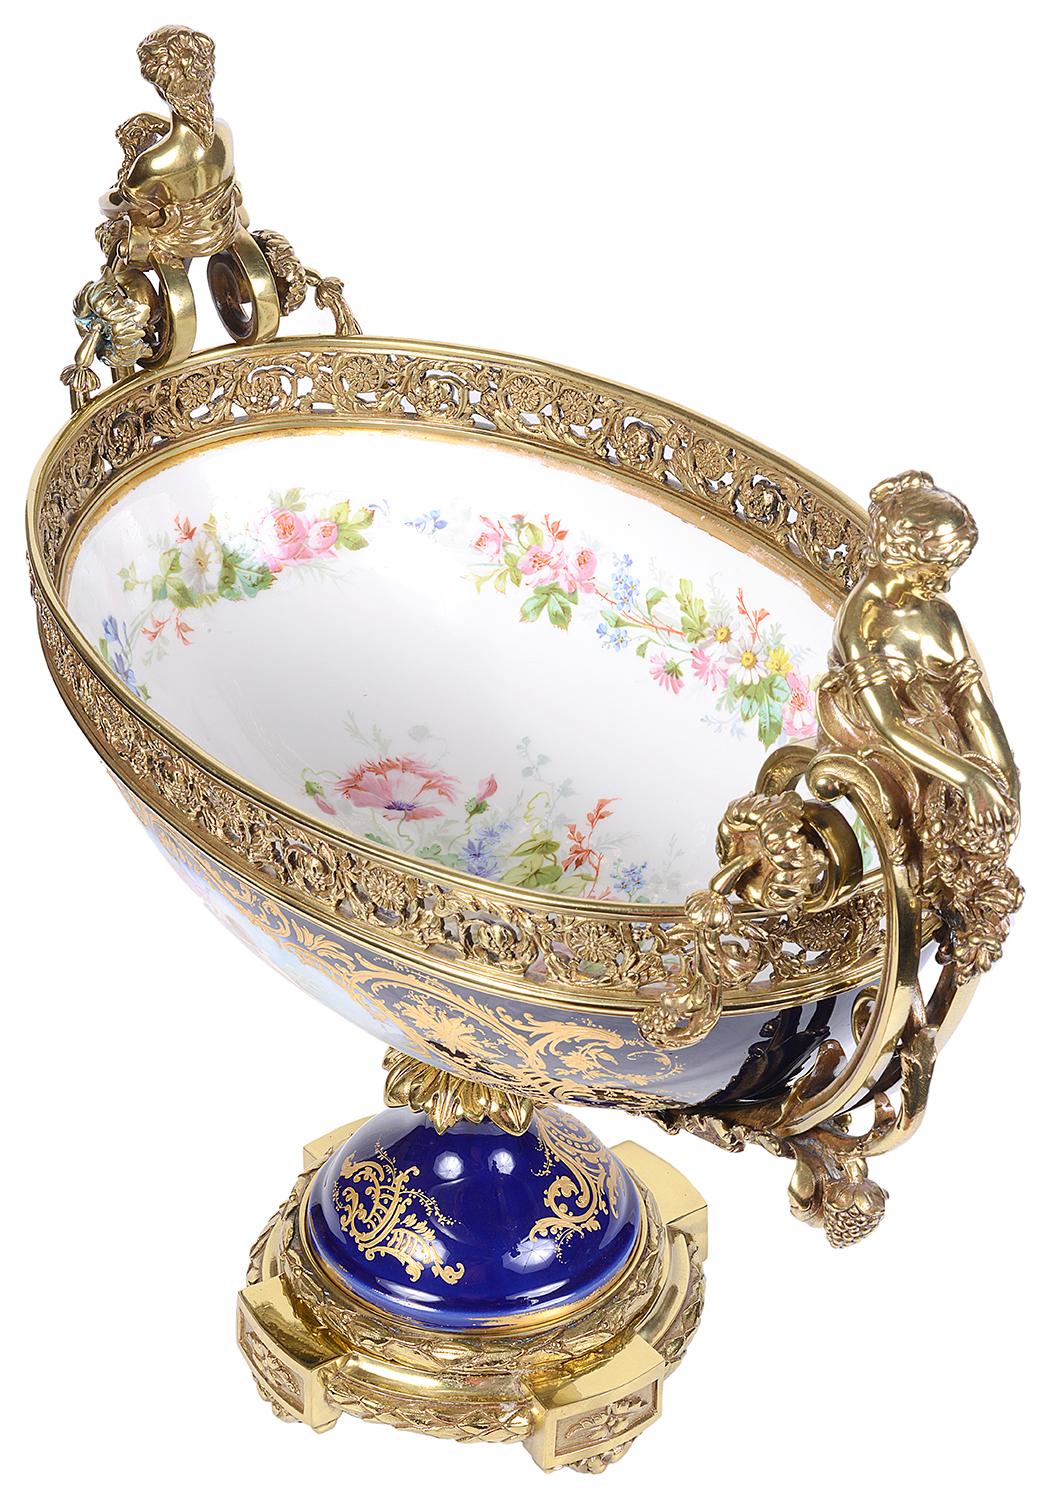 Hand-Painted 19th Century French Sevres style porcelain comport. For Sale